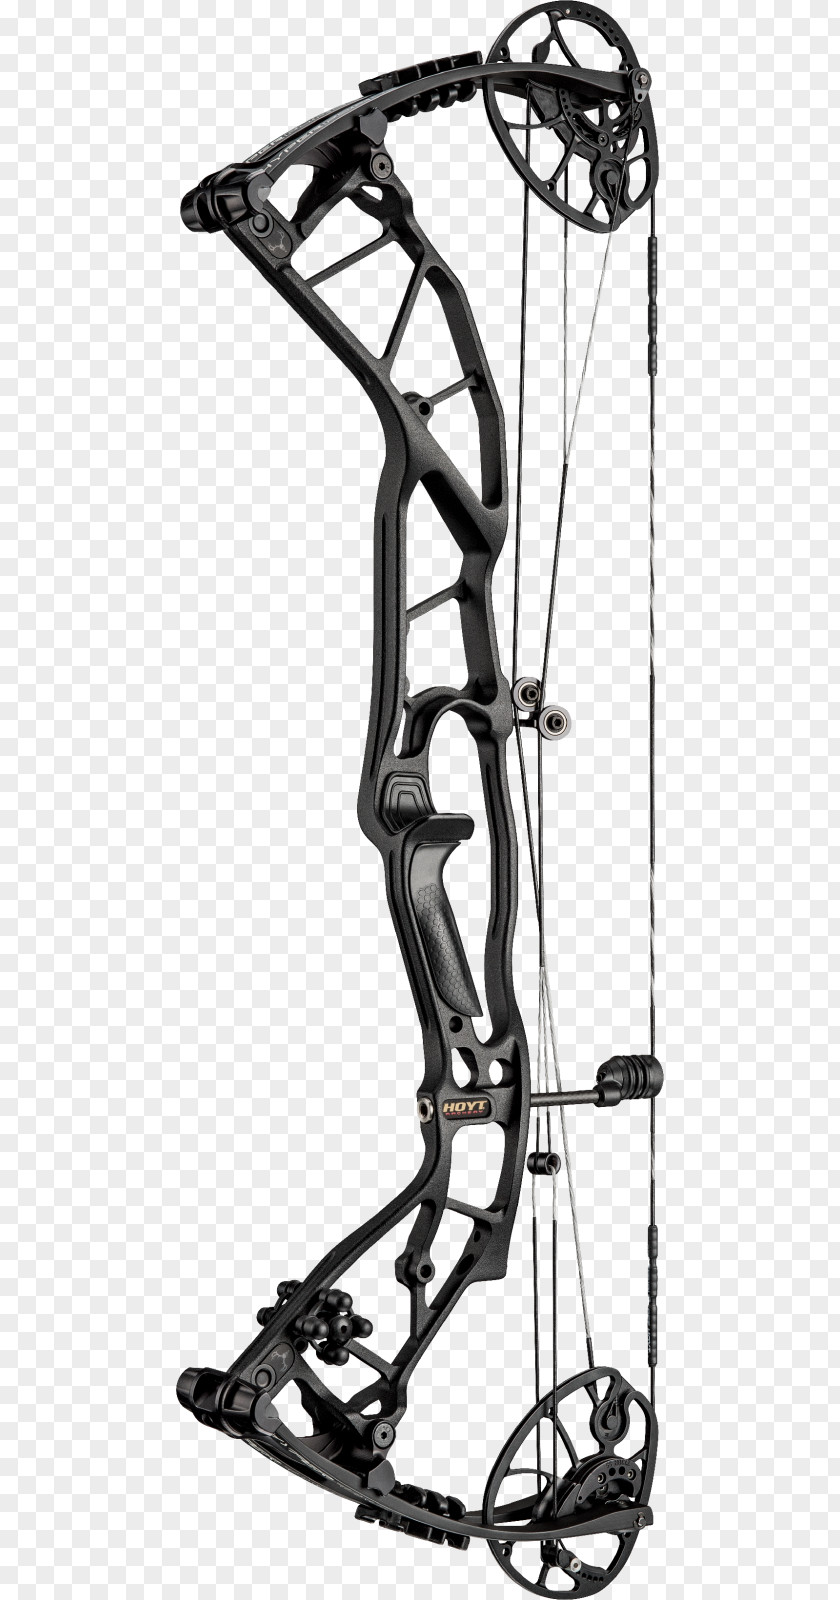 Compound Bows Bow And Arrow Archery Bowhunting PNG